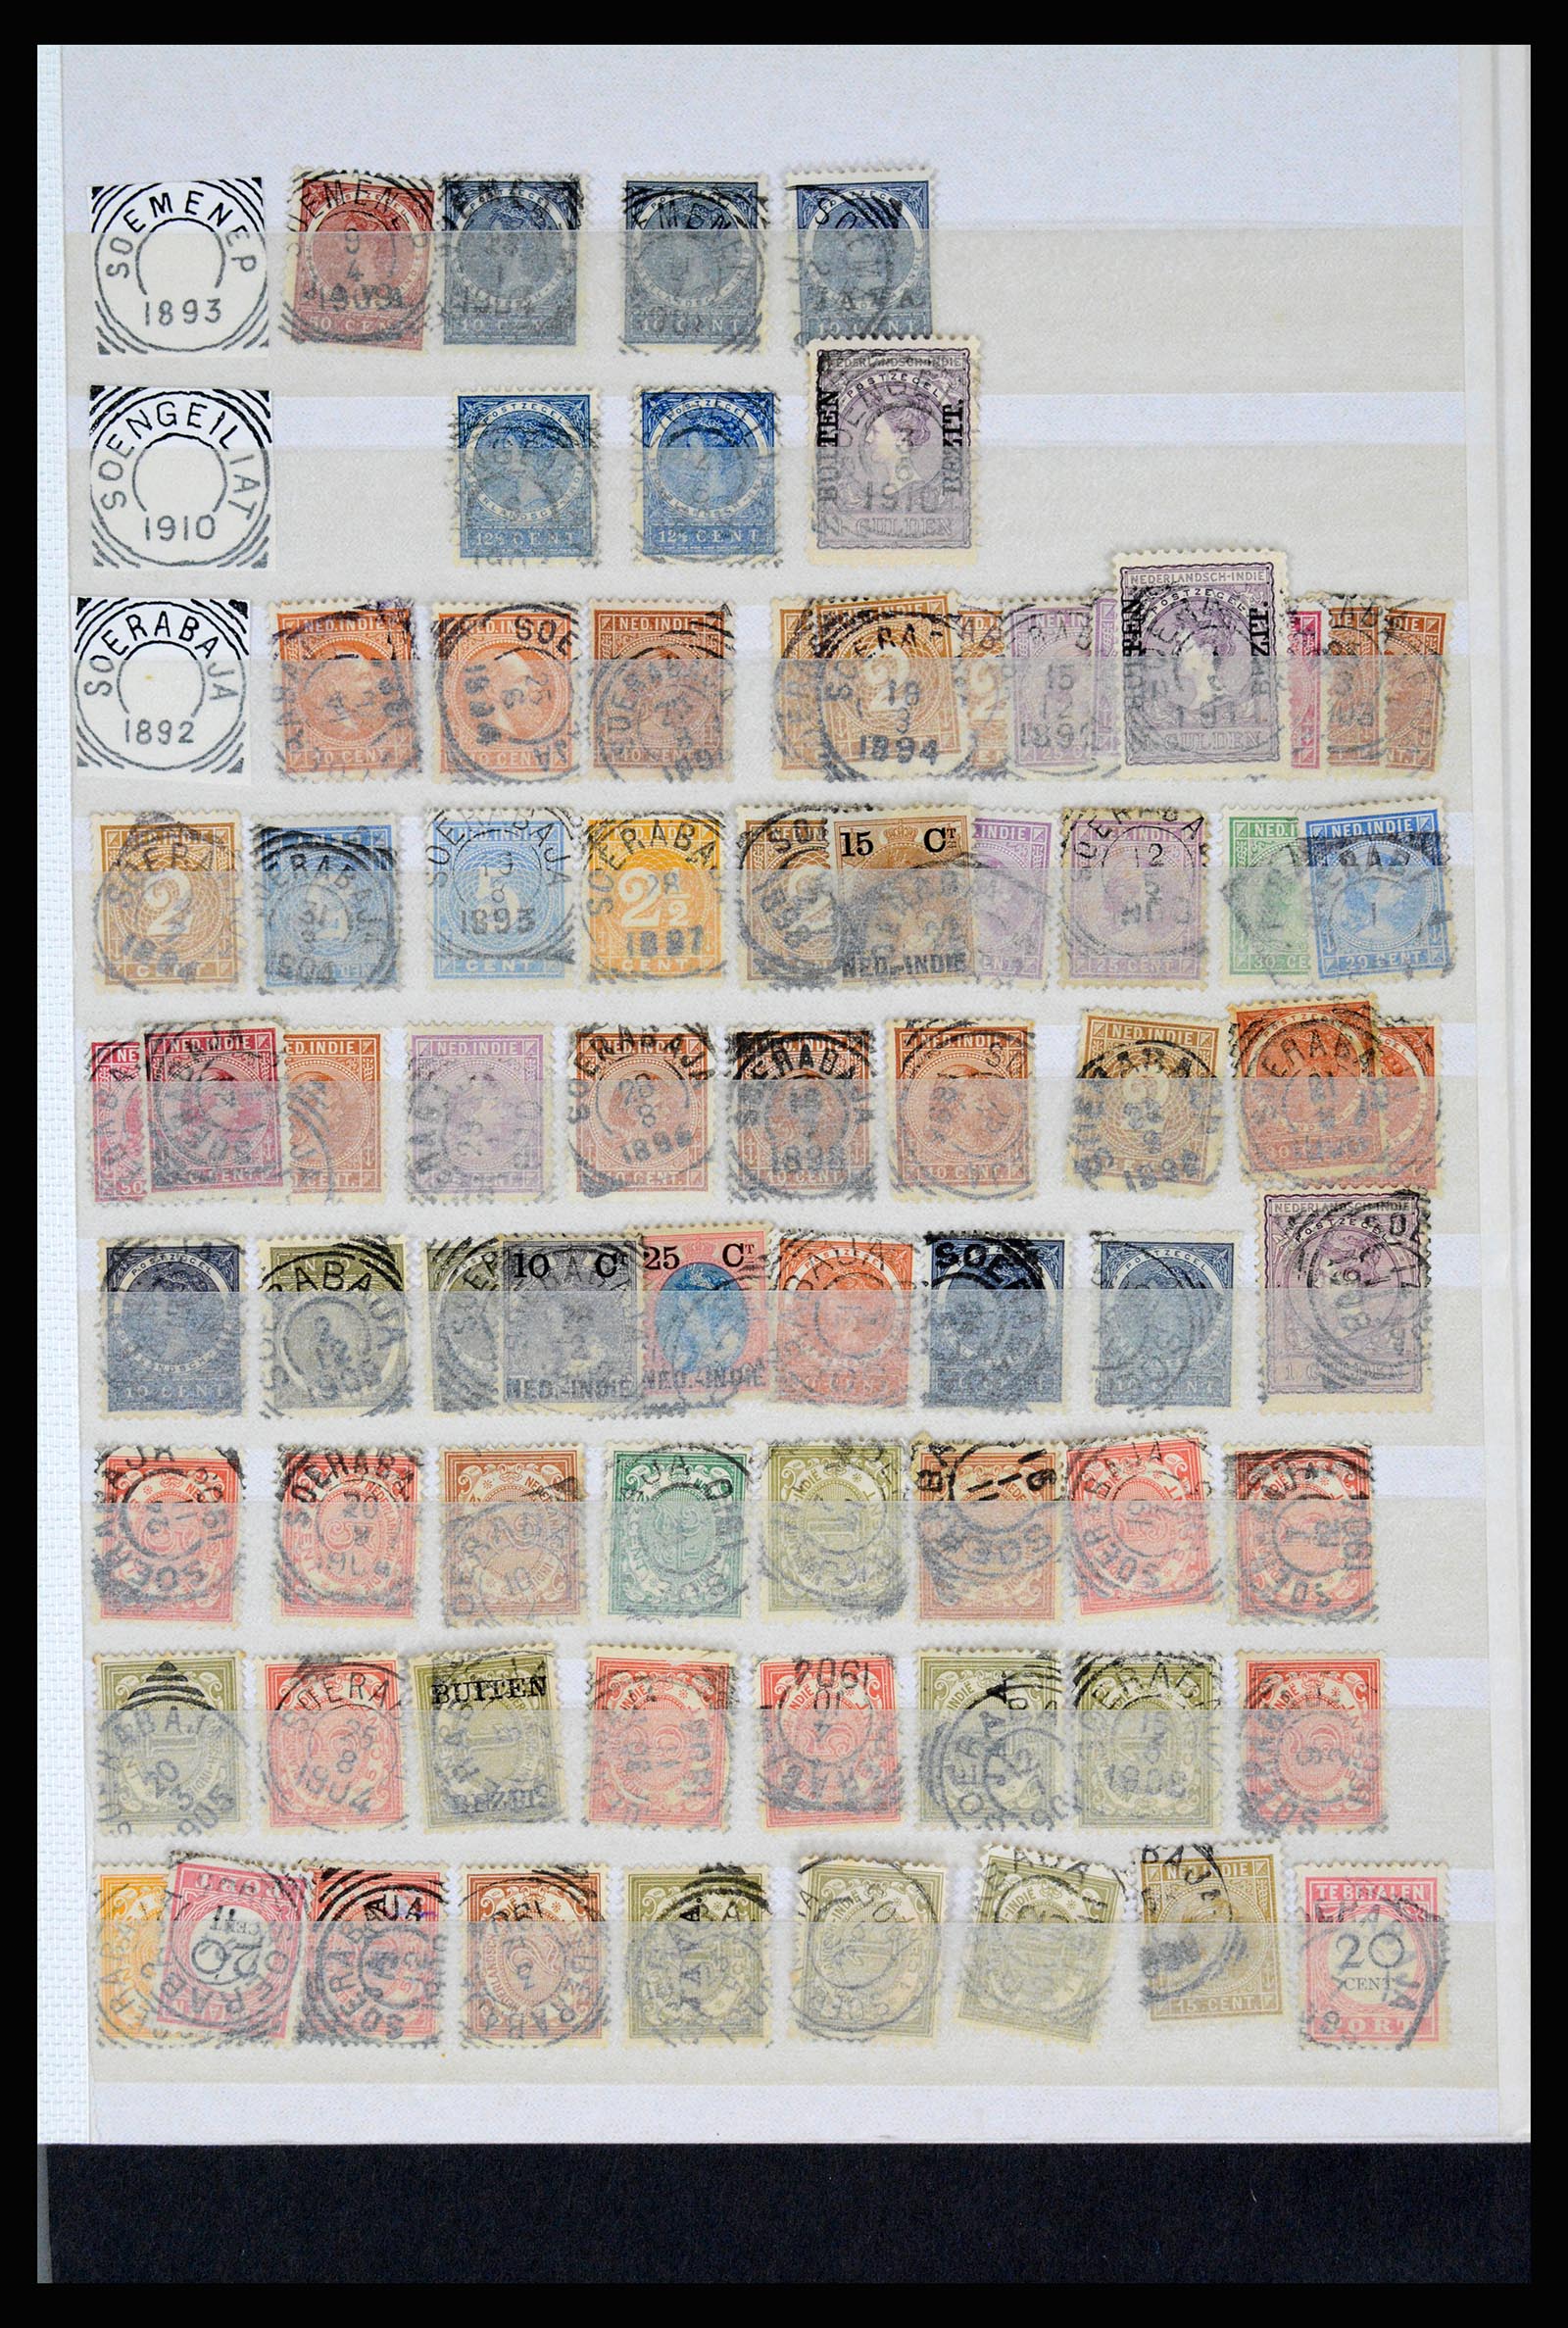 36839 092 - Stamp collection 36839 Dutch east Indies square cancels.